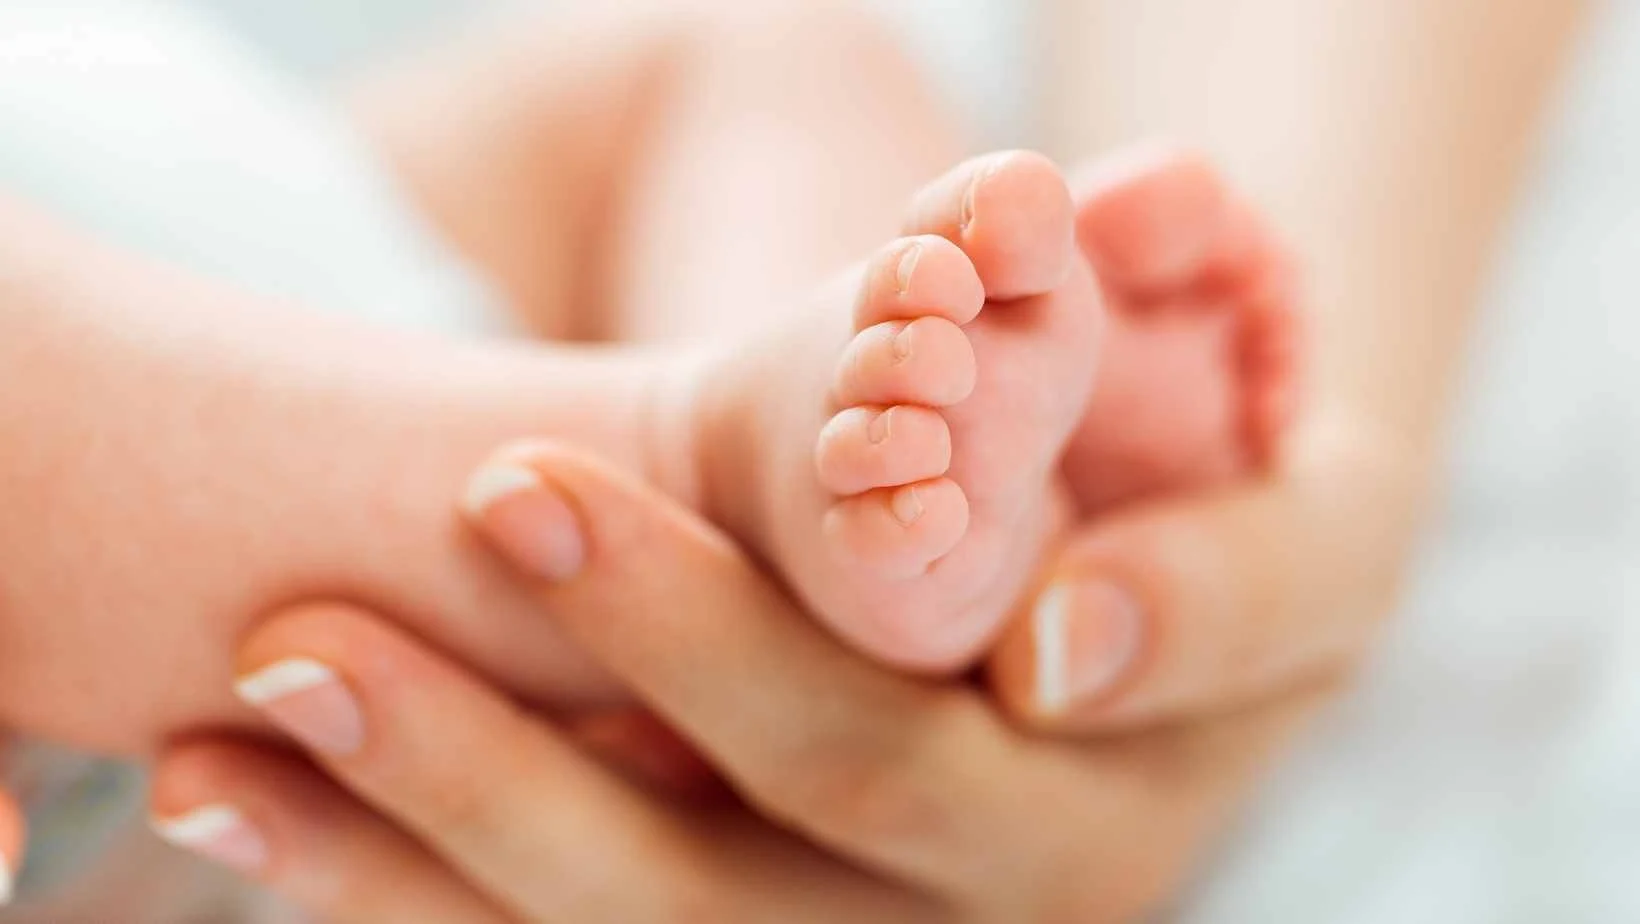 Canva stock image for a new baby showing a babies feet in a woman's hands